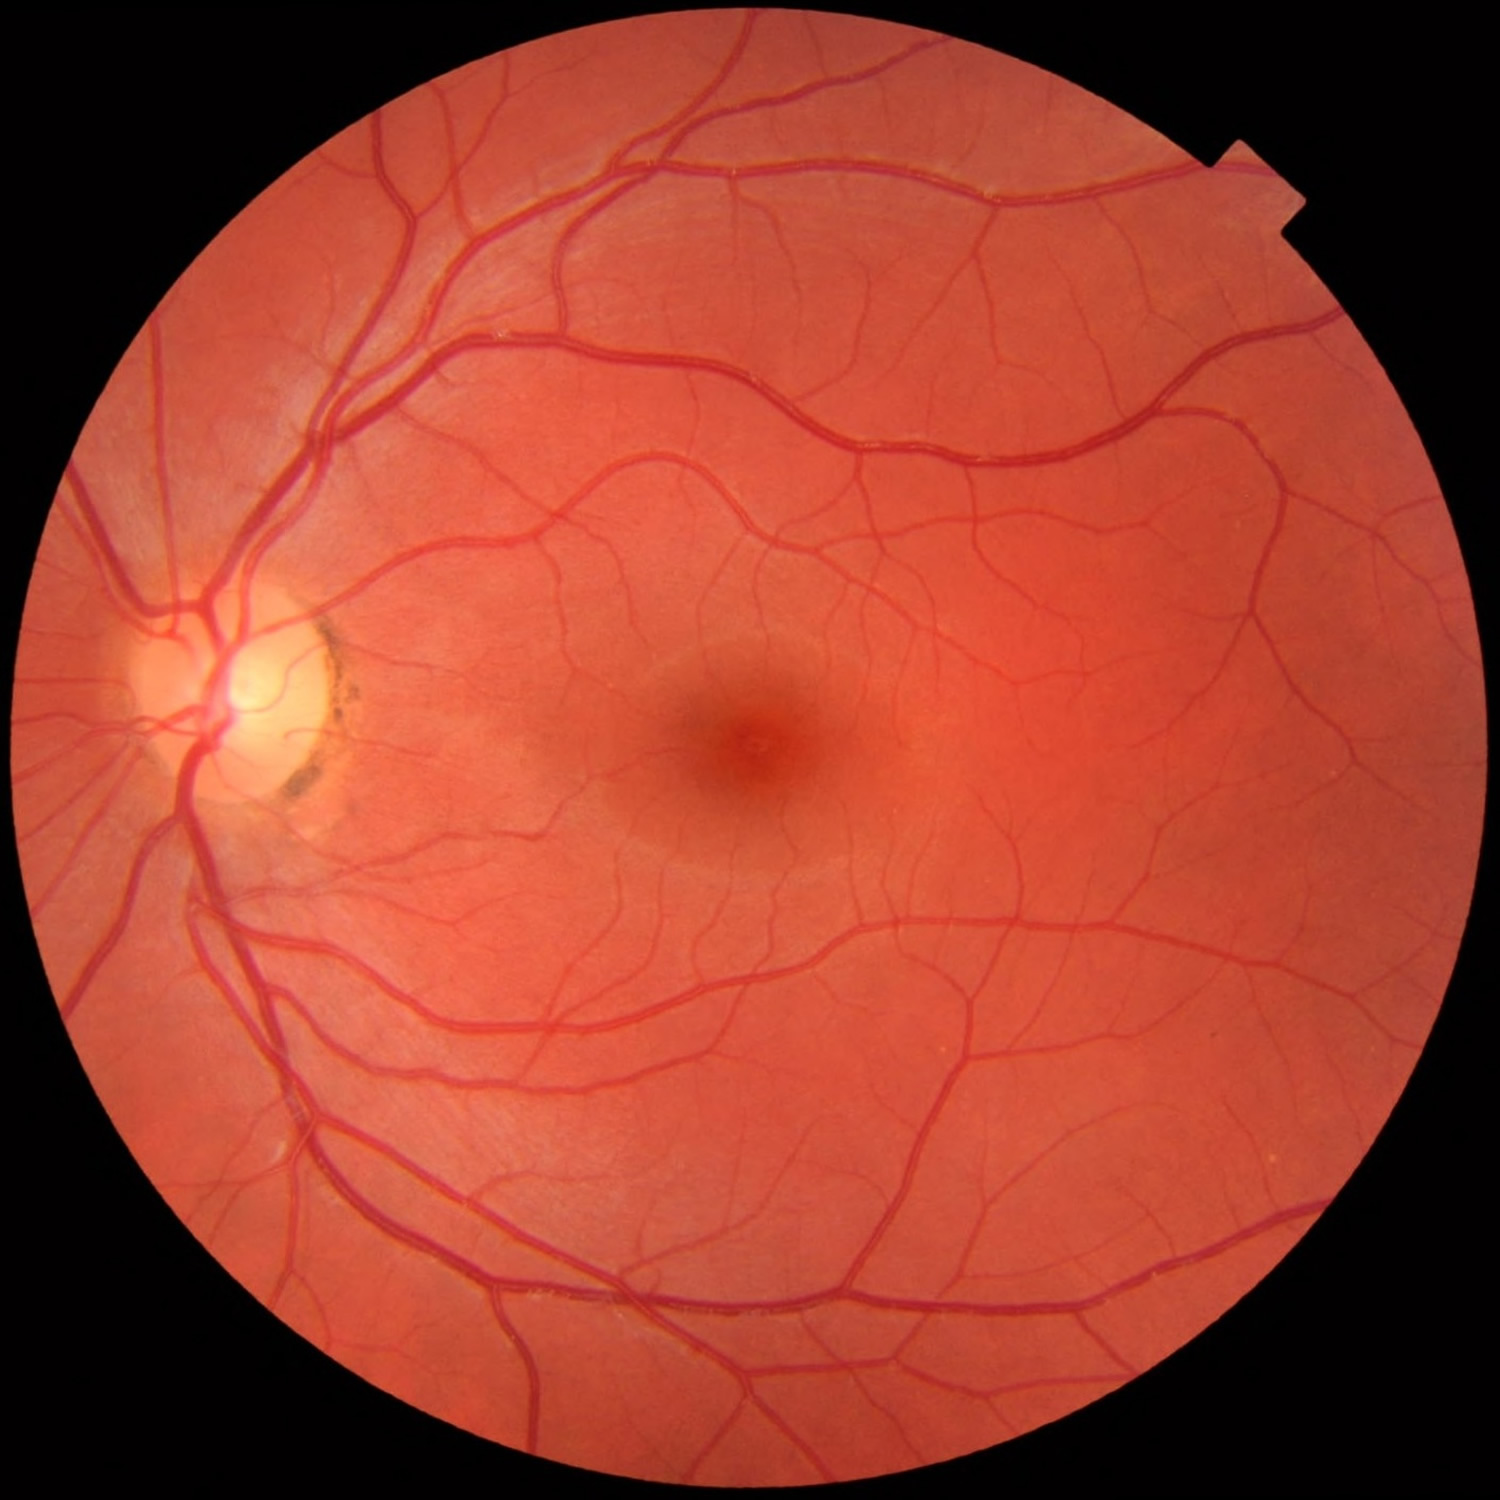 Macular degeneration Age related, Causes, Types